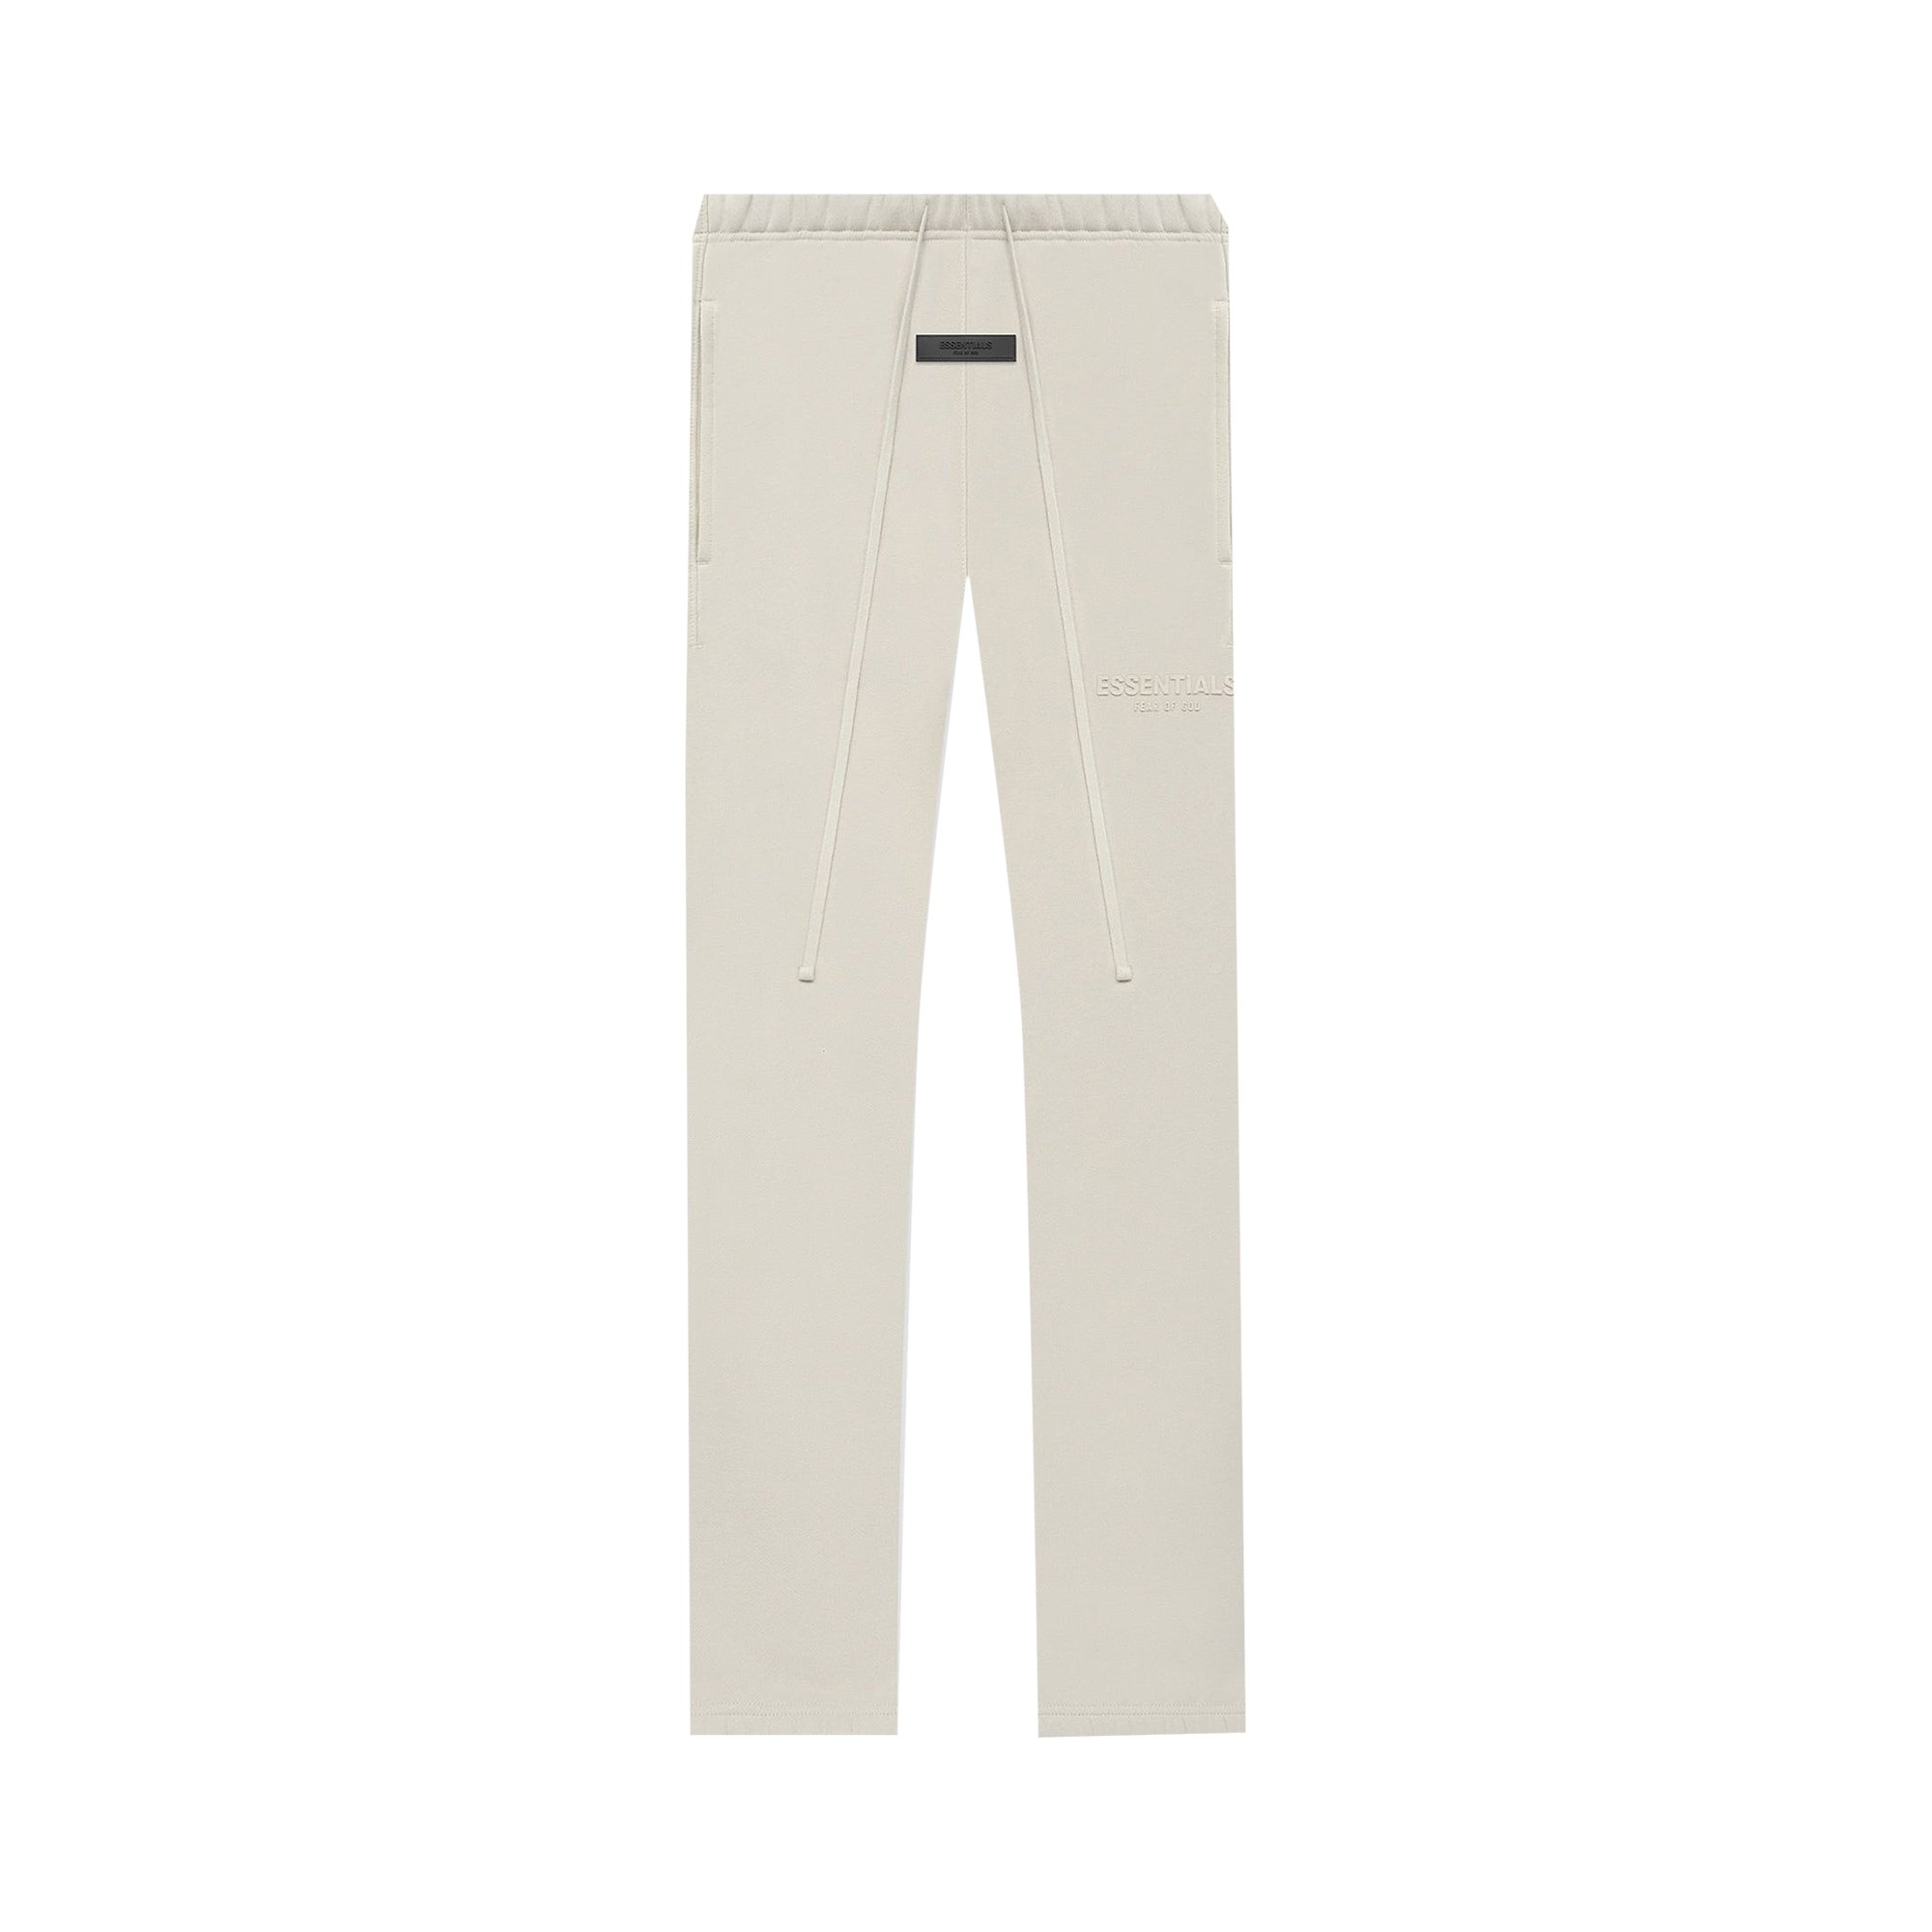 Fear of God Essentials Relaxed Sweatpants 'Wheat'